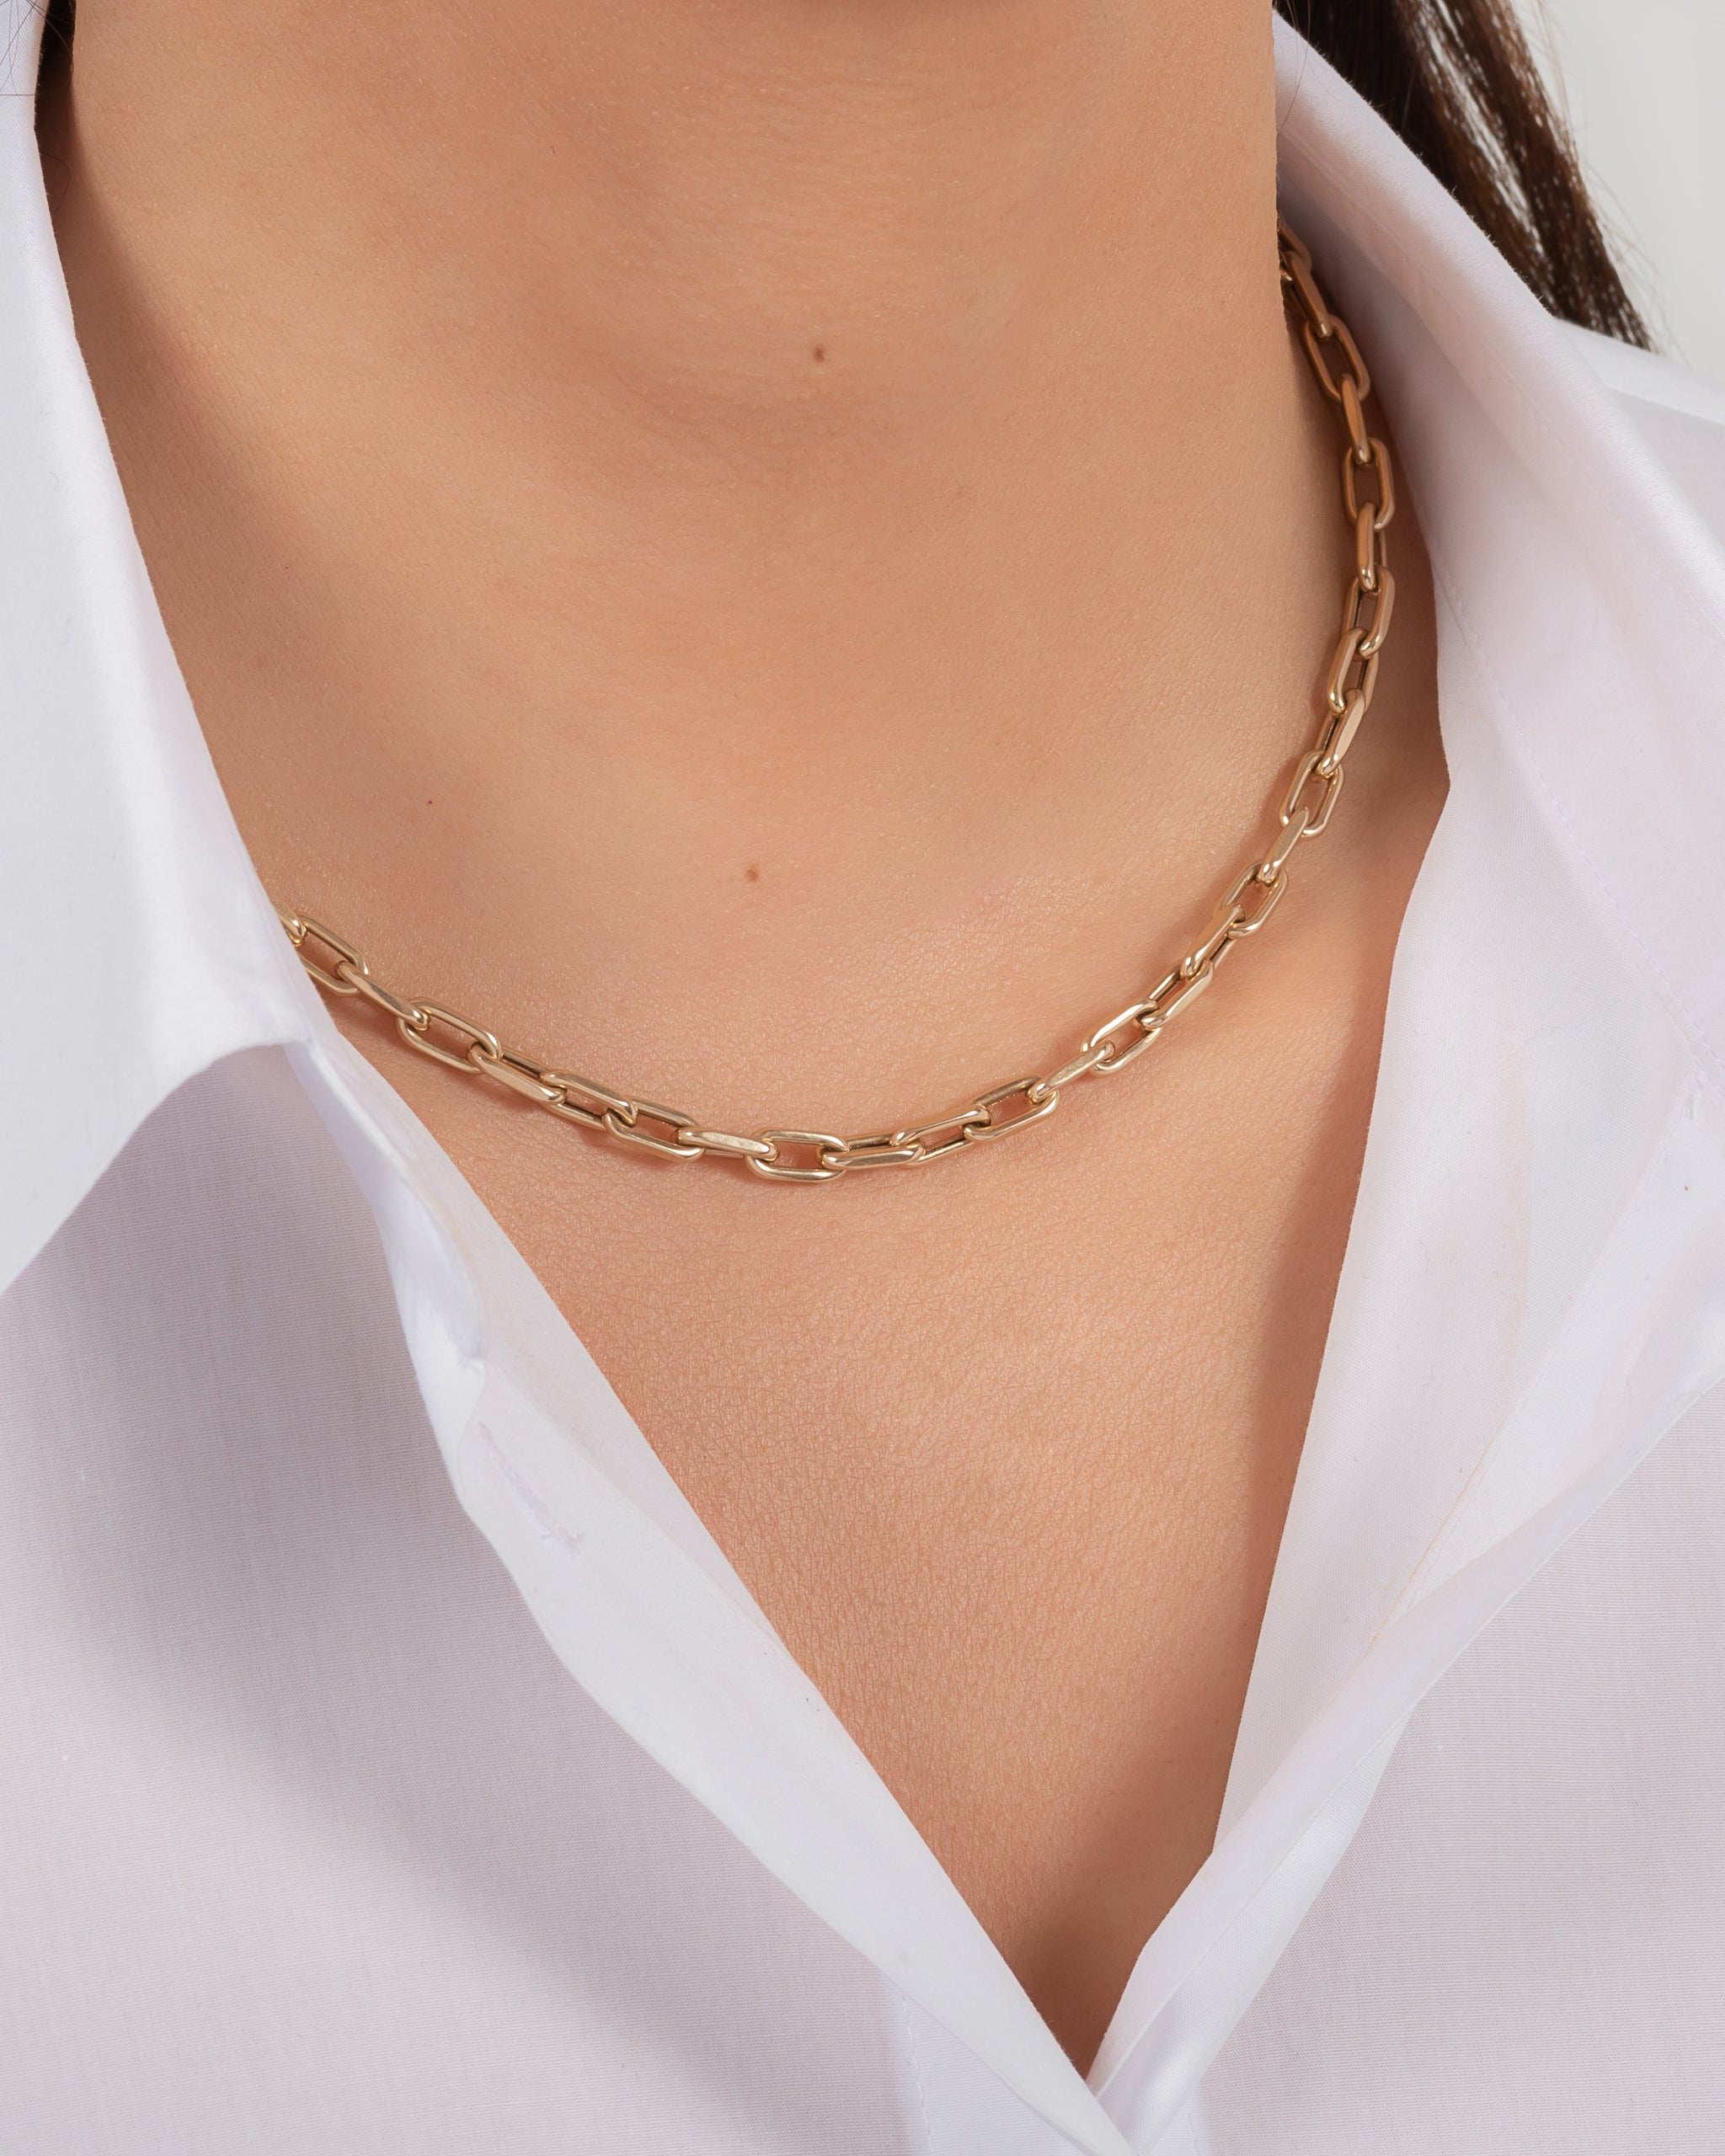  Chunky Gold Chain Big Link Necklaces for Women 14K